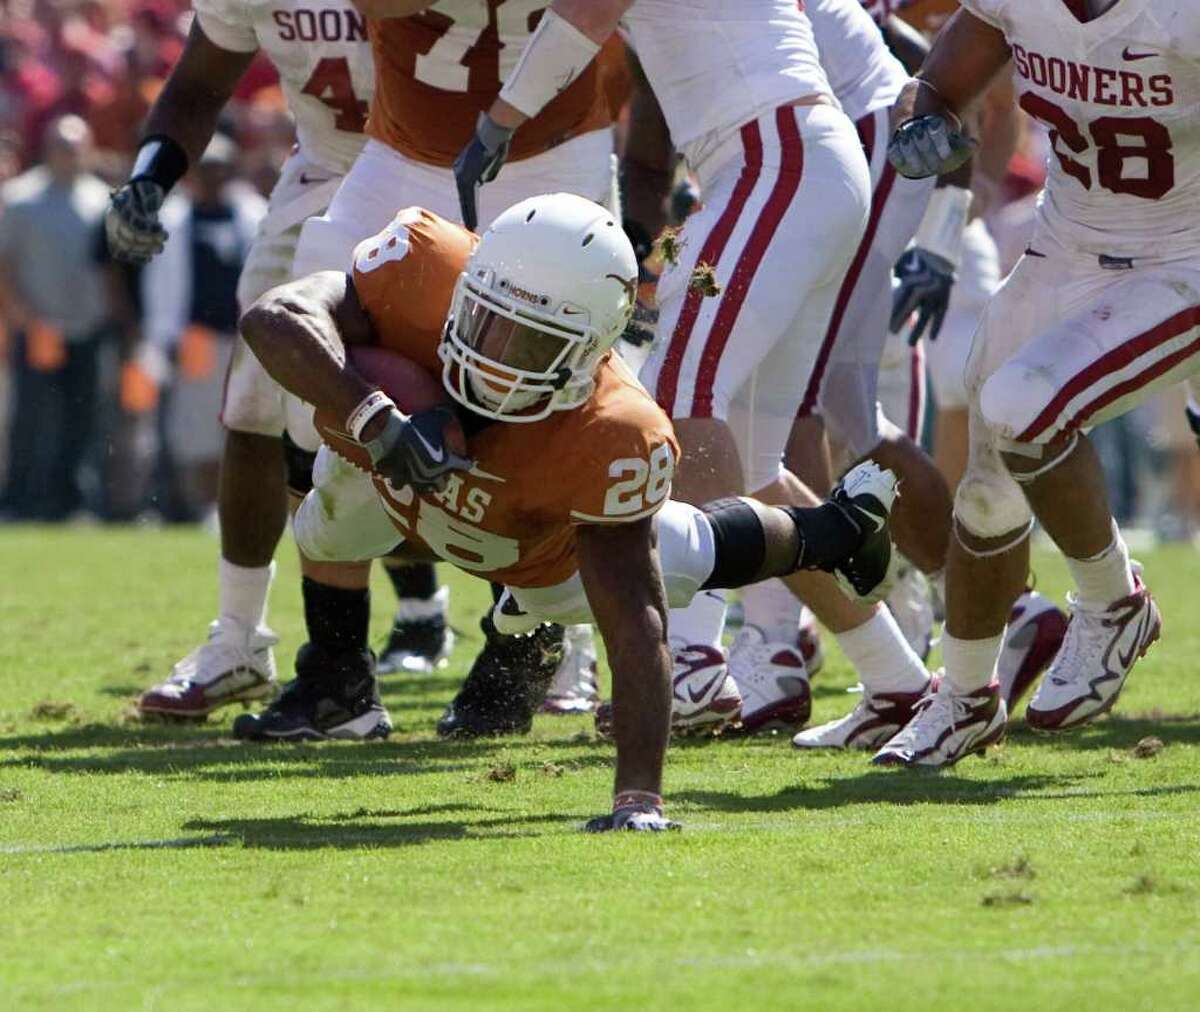 Texas running back Fozzy Whittaker fights for yardage during the second half of The University of Texas and Oklahoma University's match-up in the Red Rivalry at the Cotton Bowl at the State Fair of Texas, in Dallas Texas ,October 17, 2009. (BILLY SMITH II /CHRONICLE)